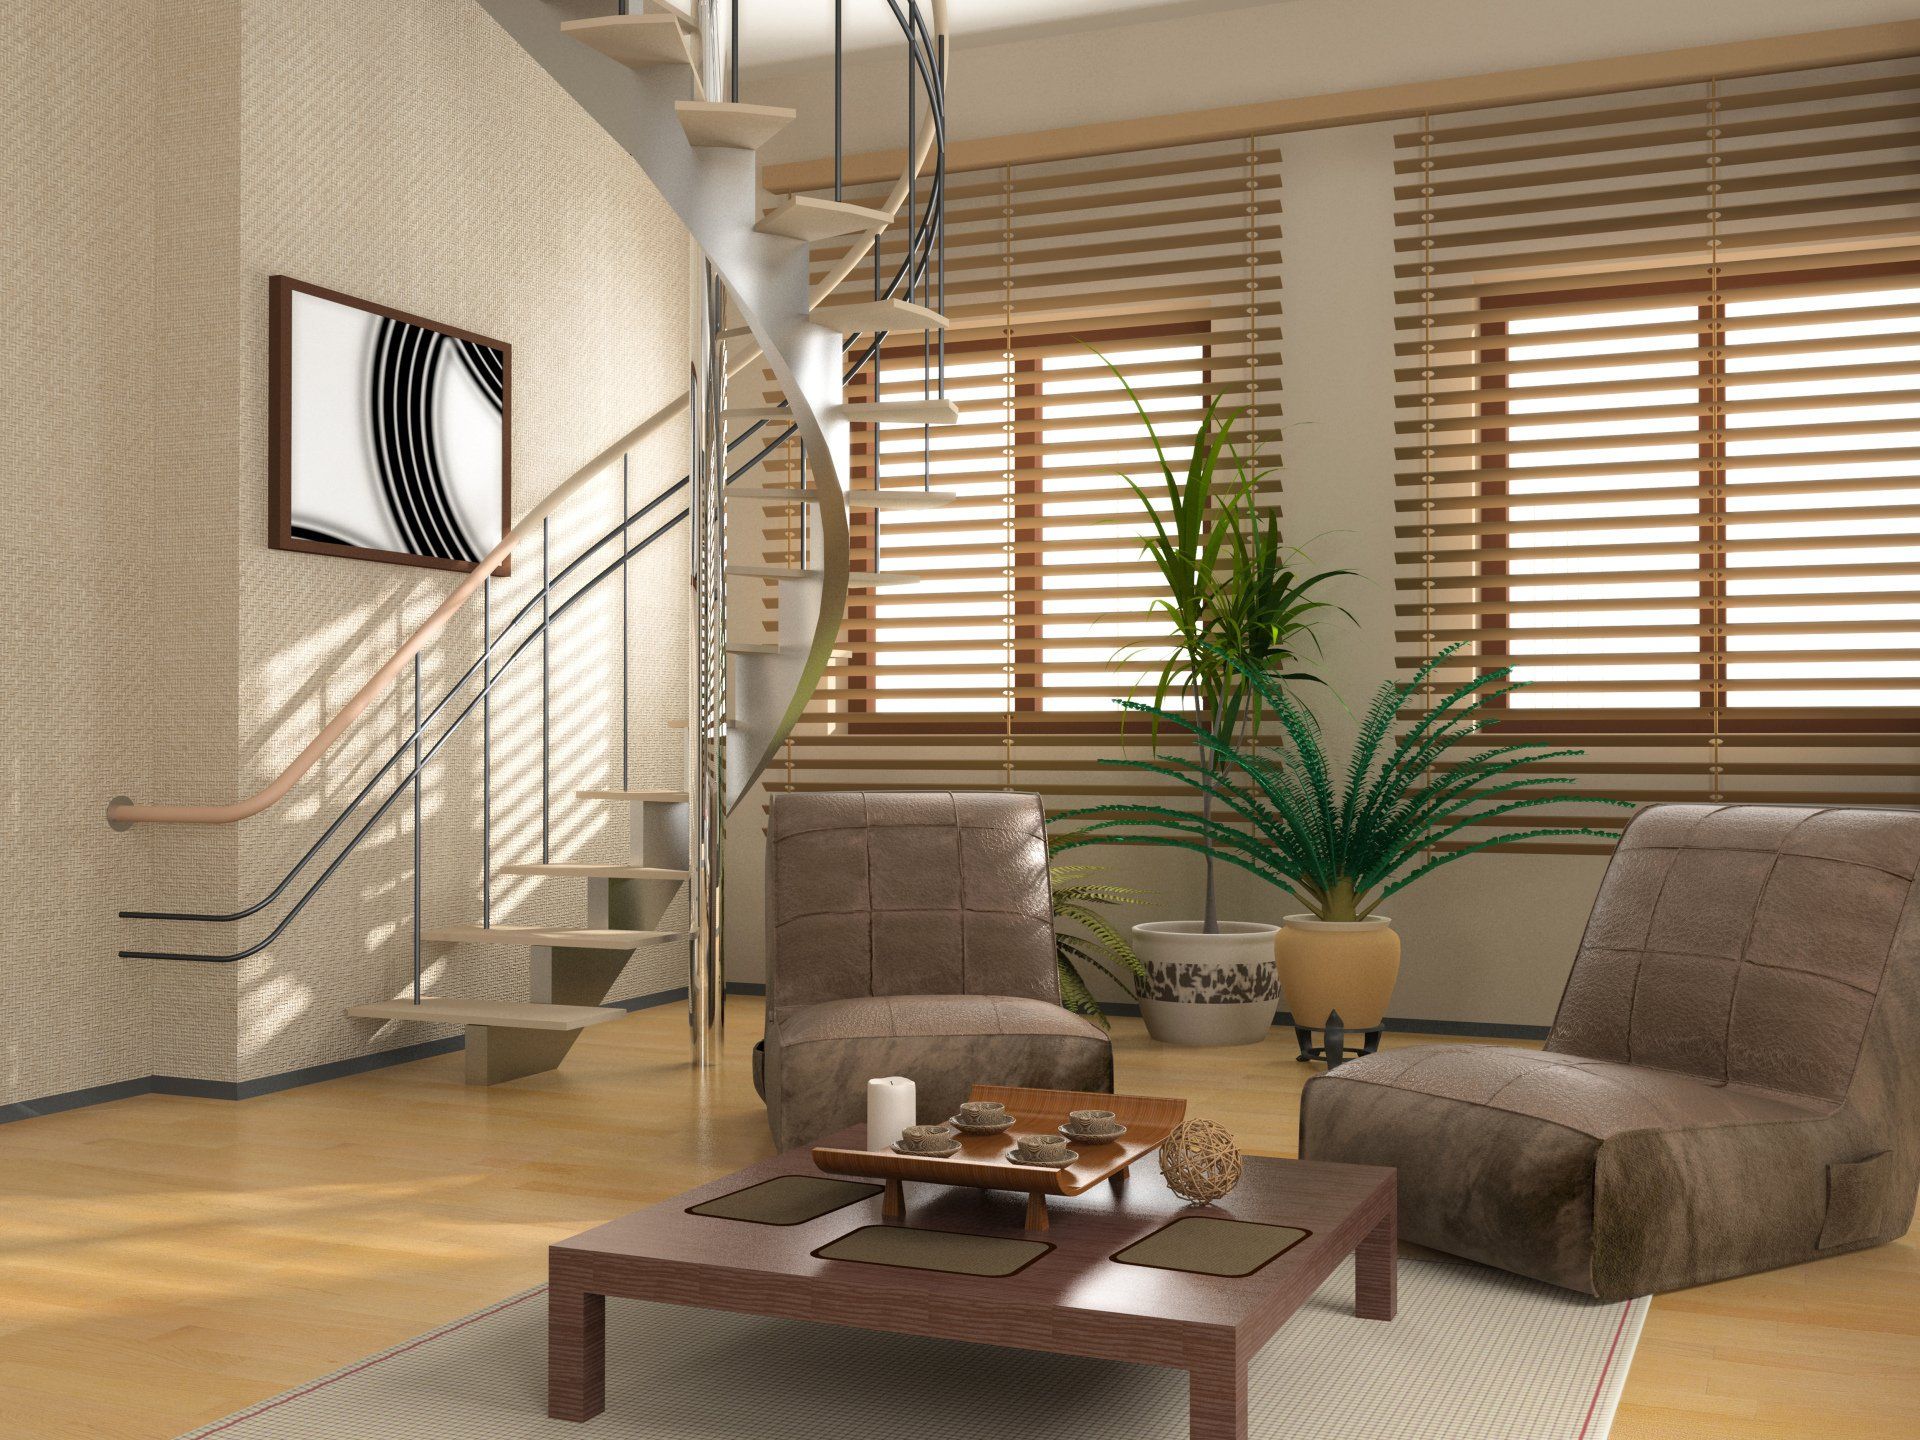 Timber venetian blinds open over windows of living room with comfy lounge chairs around coffee table, in front of potted plants. Spiral stairway leading upwards.